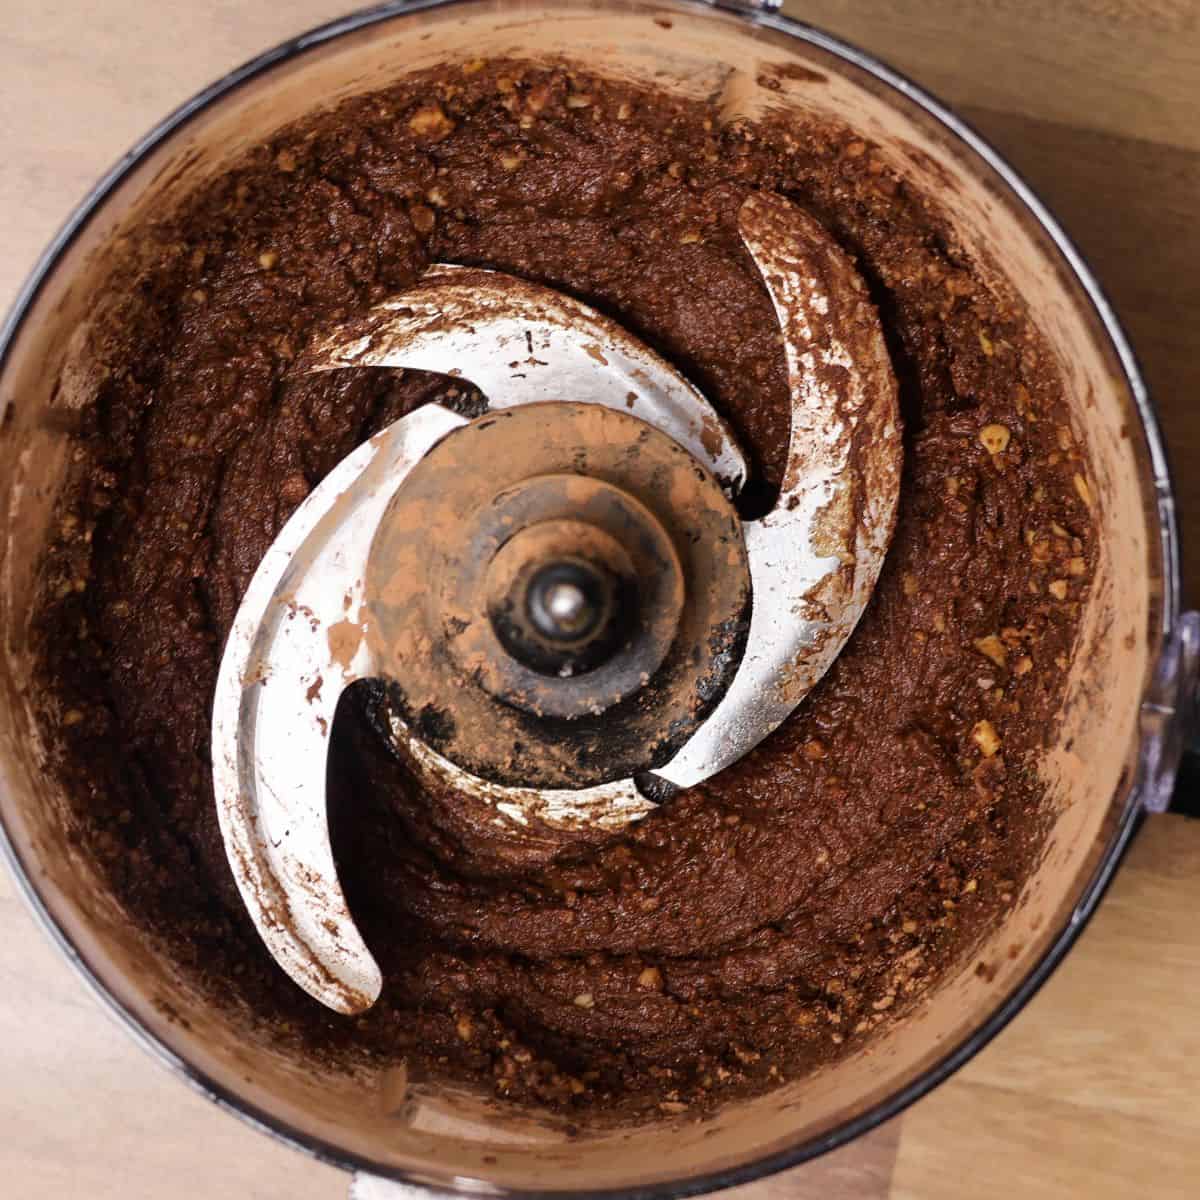 Food processor with dark chocolate hummus ingredients before the addition of almond milk, displaying a thick texture with visible chickpeas.